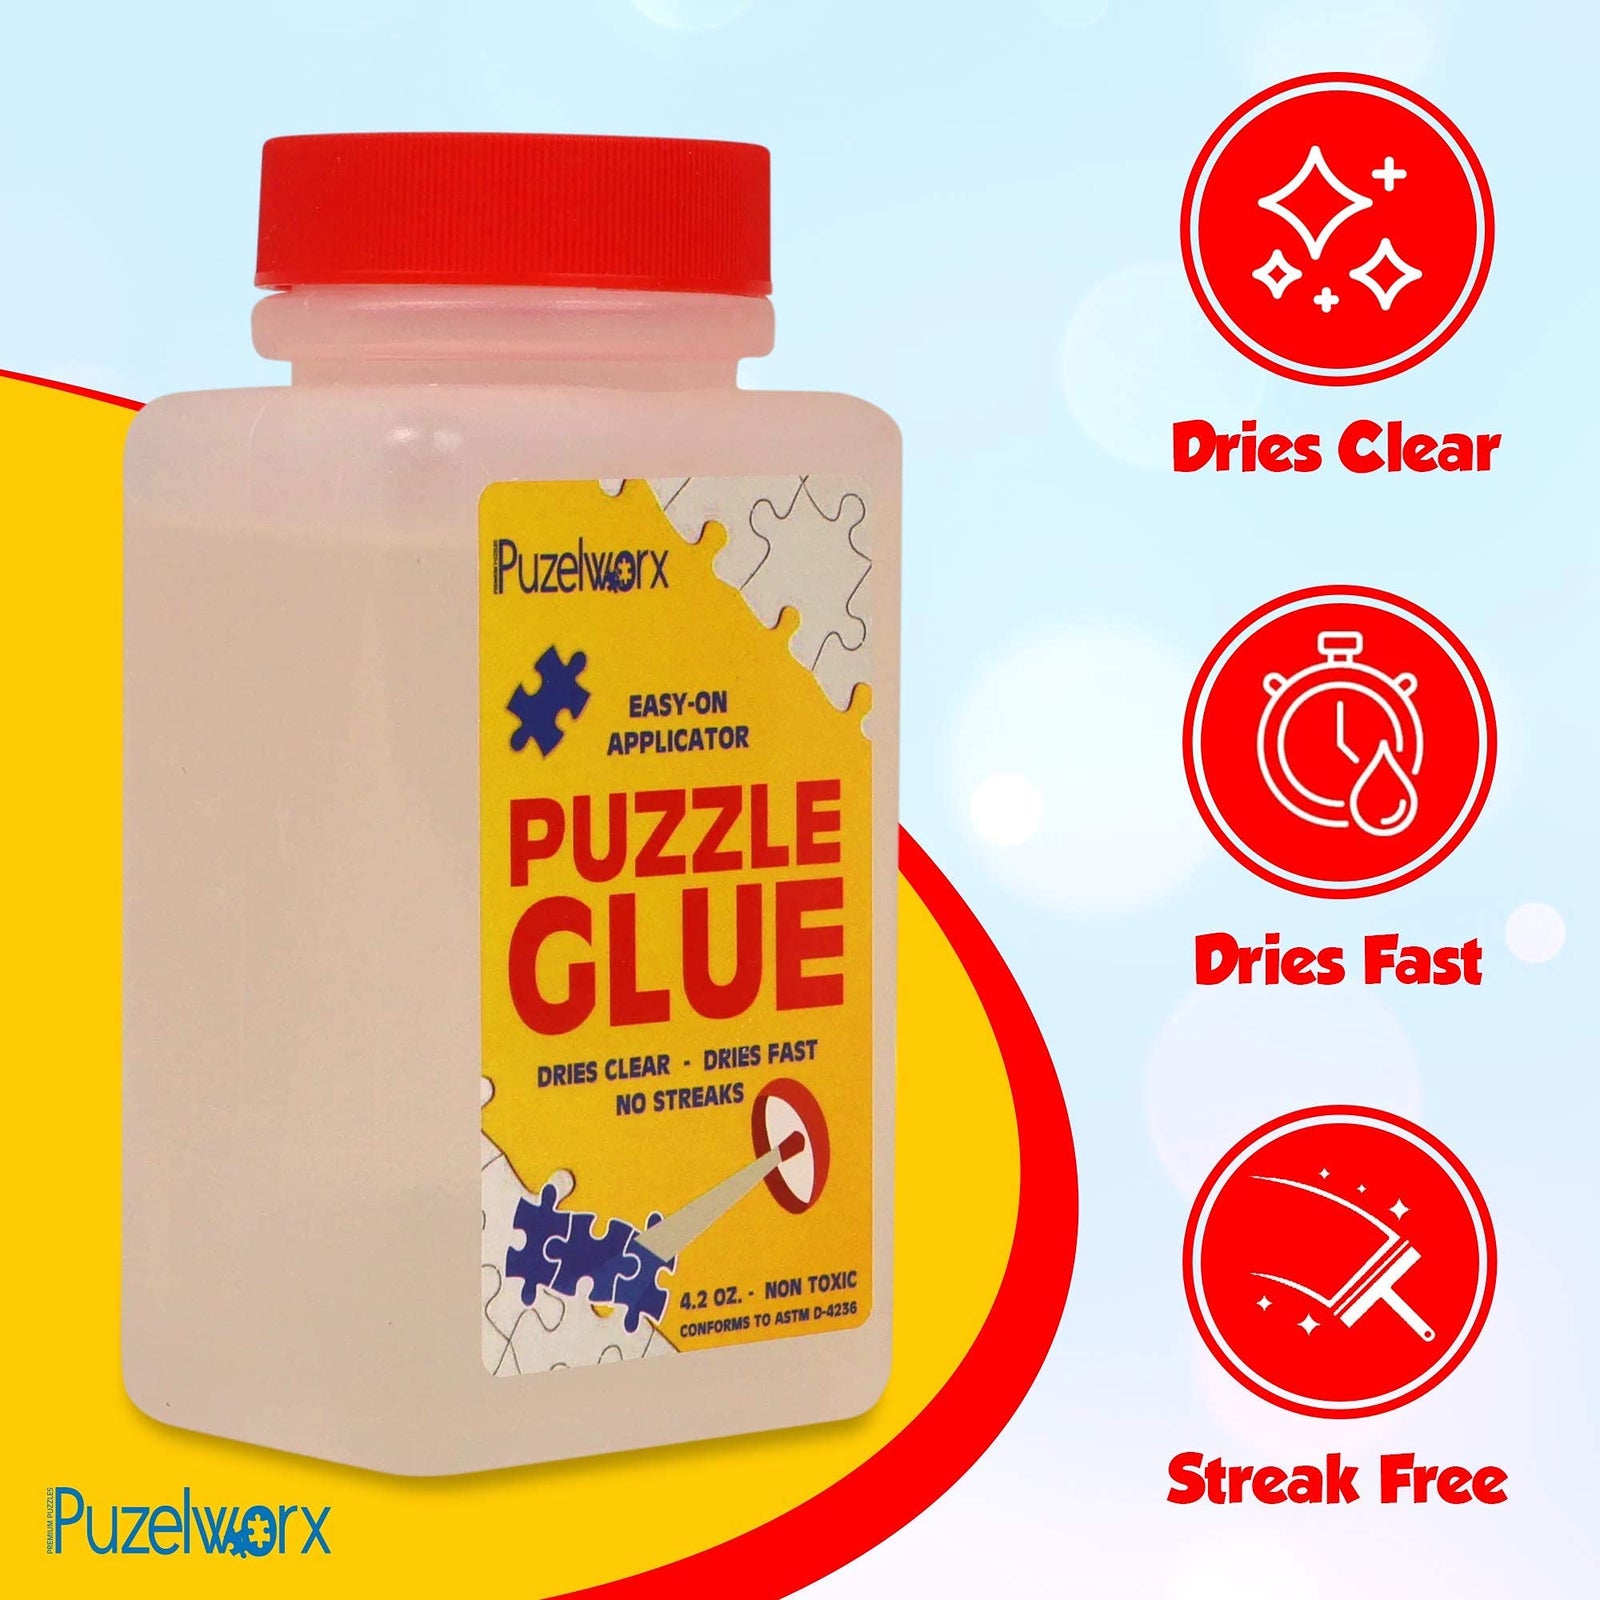 PuzzleWorx Easy-On Applicator Puzzle Glue, Pack of 2, Non Toxic Clear Glue for 1000 Piece Puzzles 4.2 oz Each Bottle (Total 8.4)